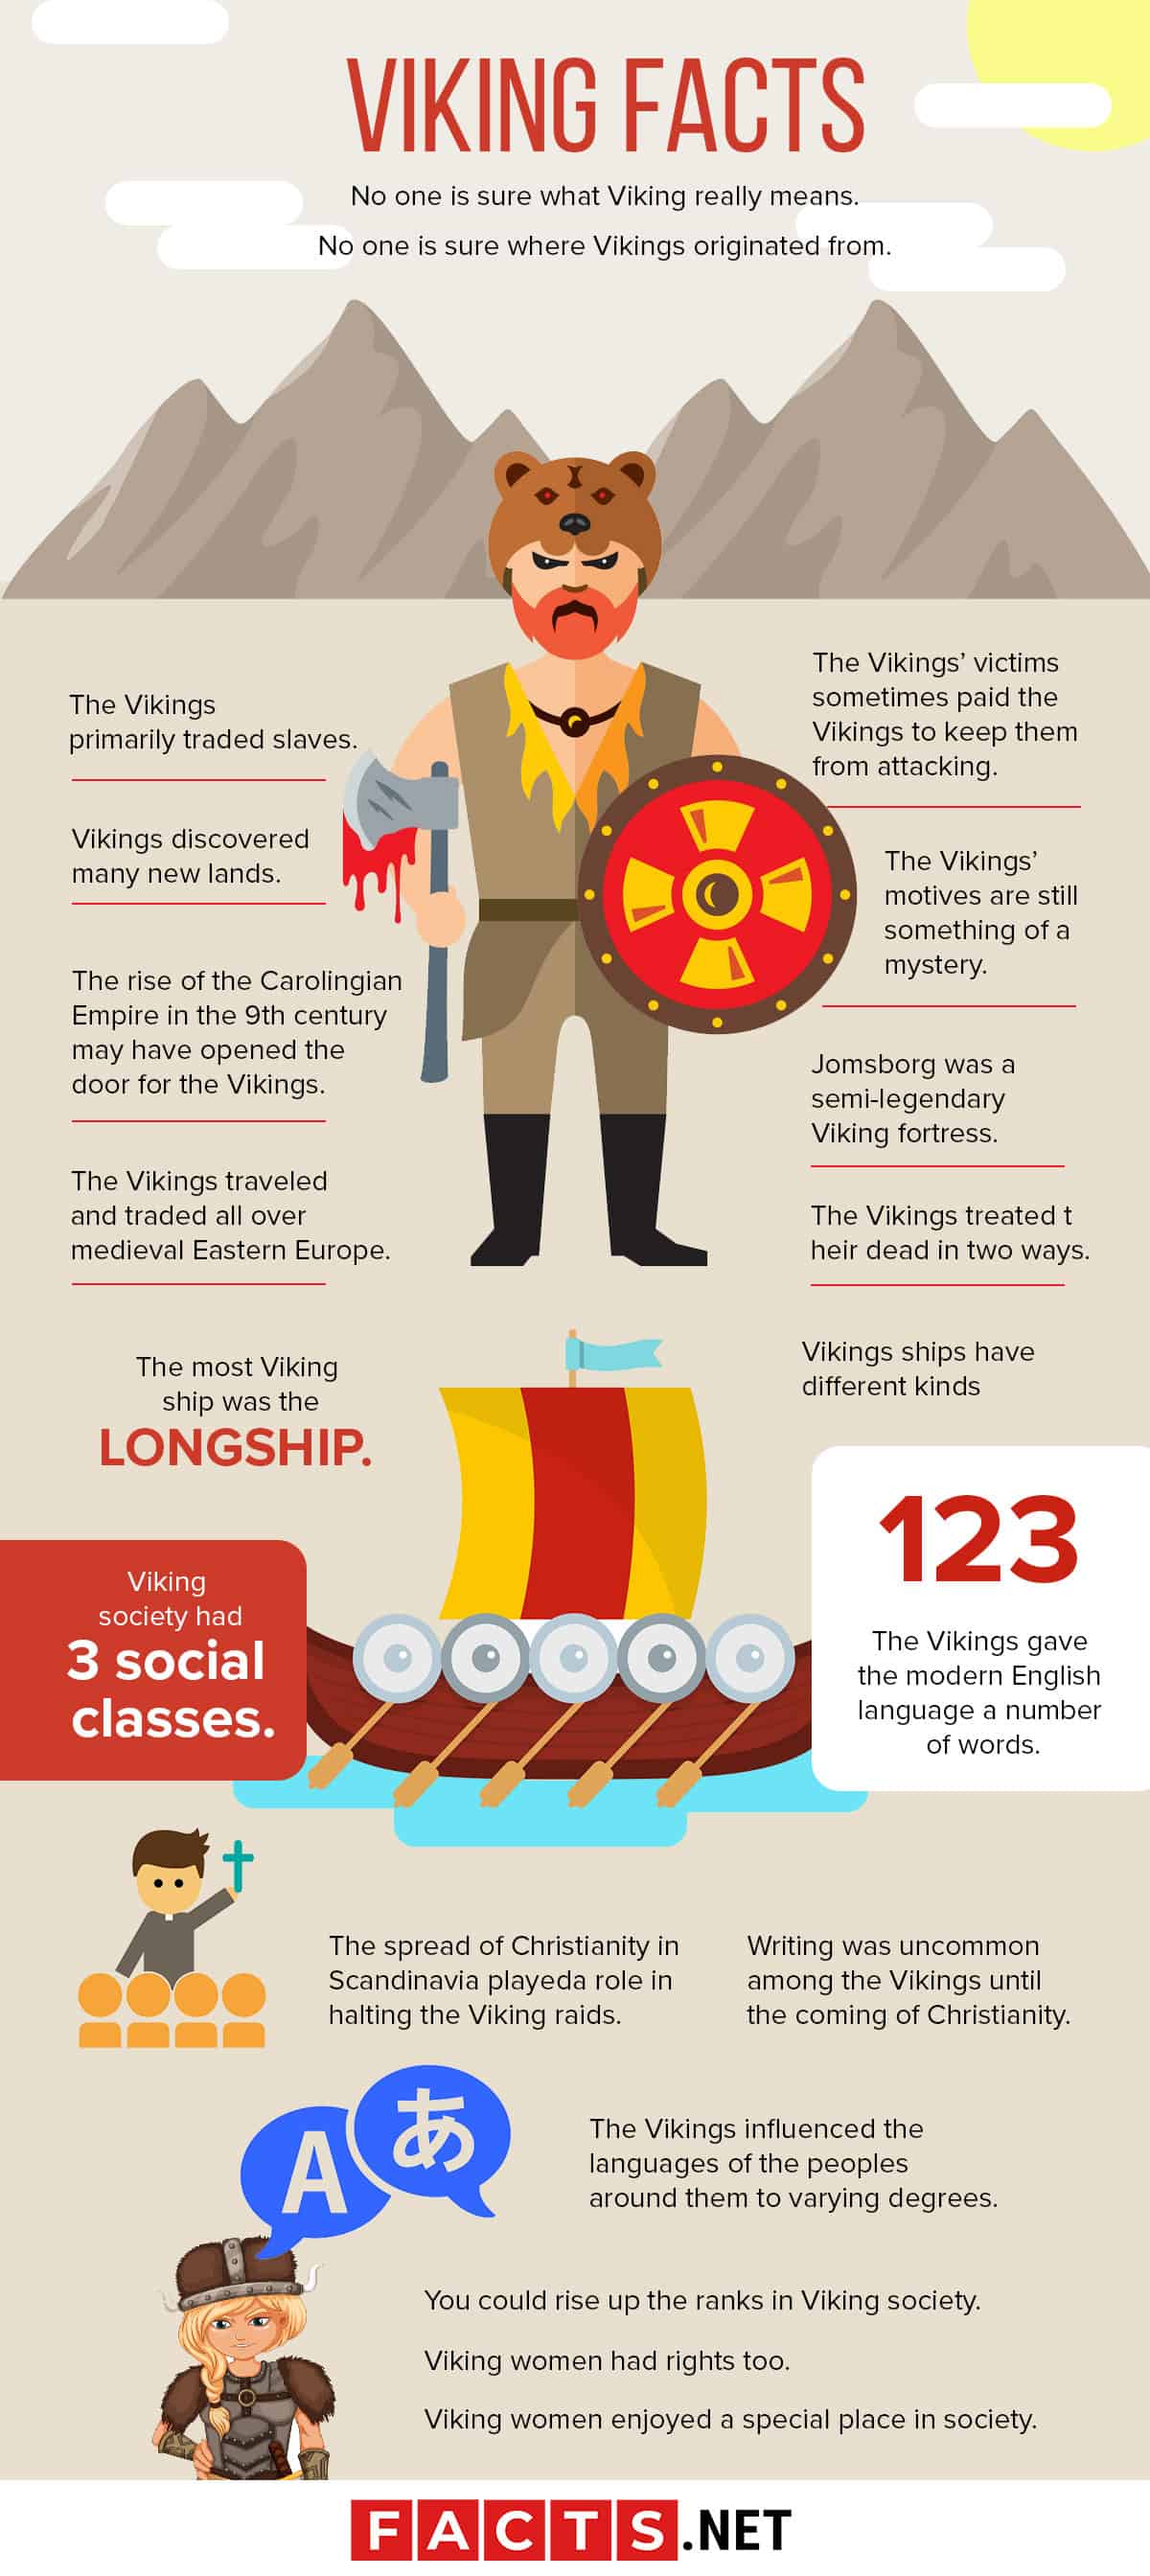 50-viking-facts-you-probably-got-wrong-about-the-world-s-seafarers